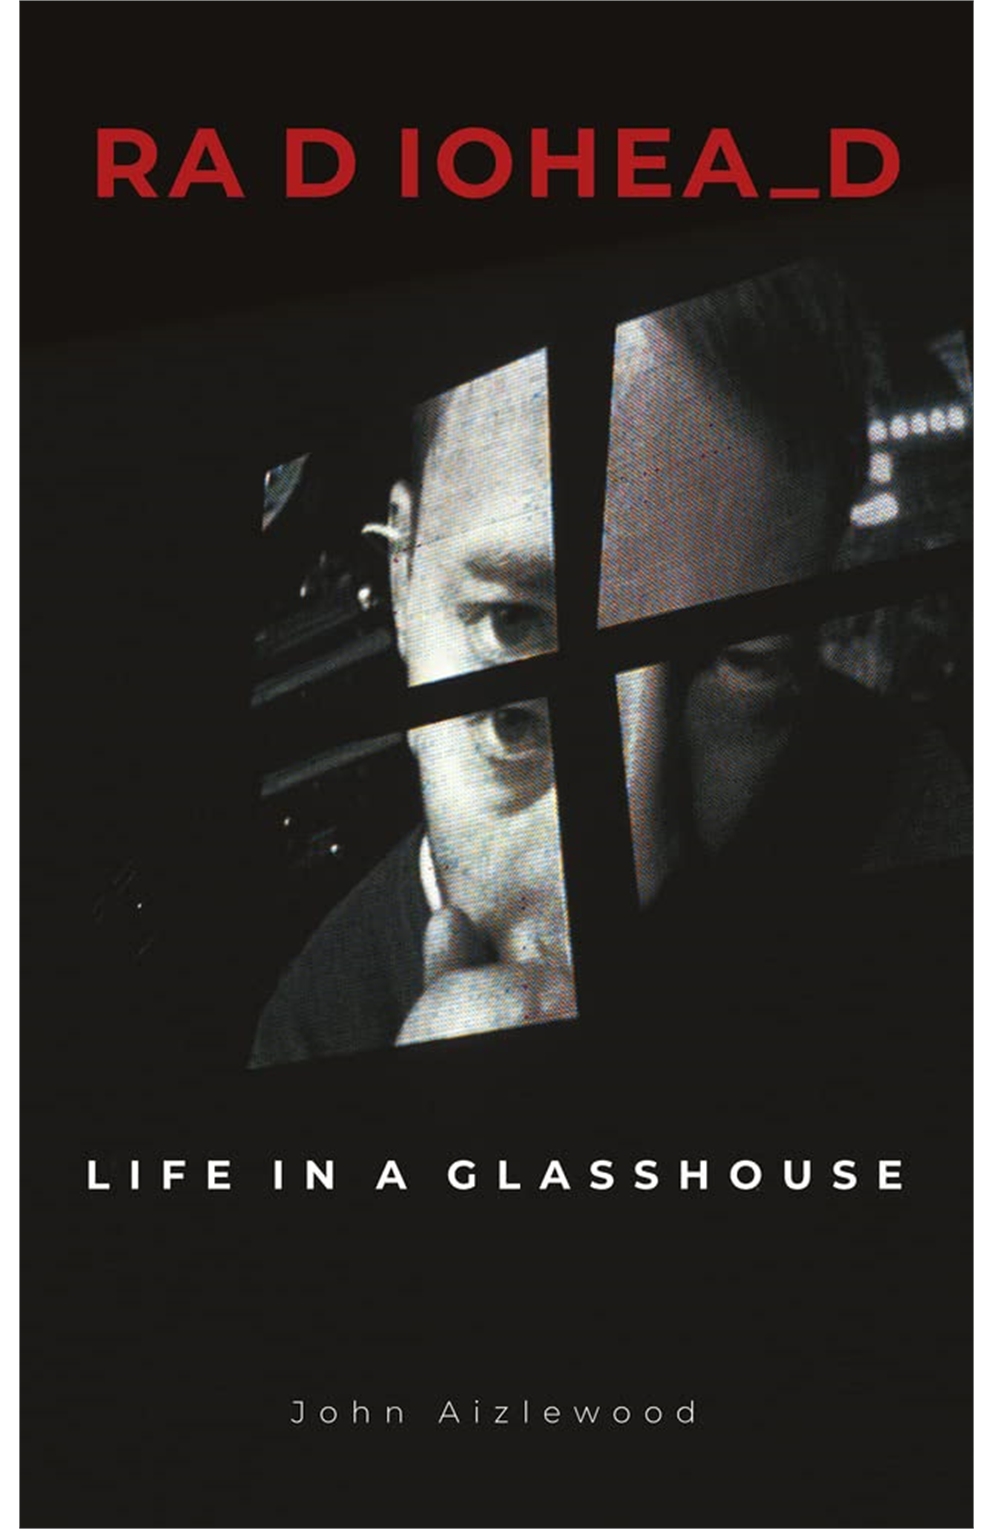 Radiohead - Life In A Glasshouse Hardcover